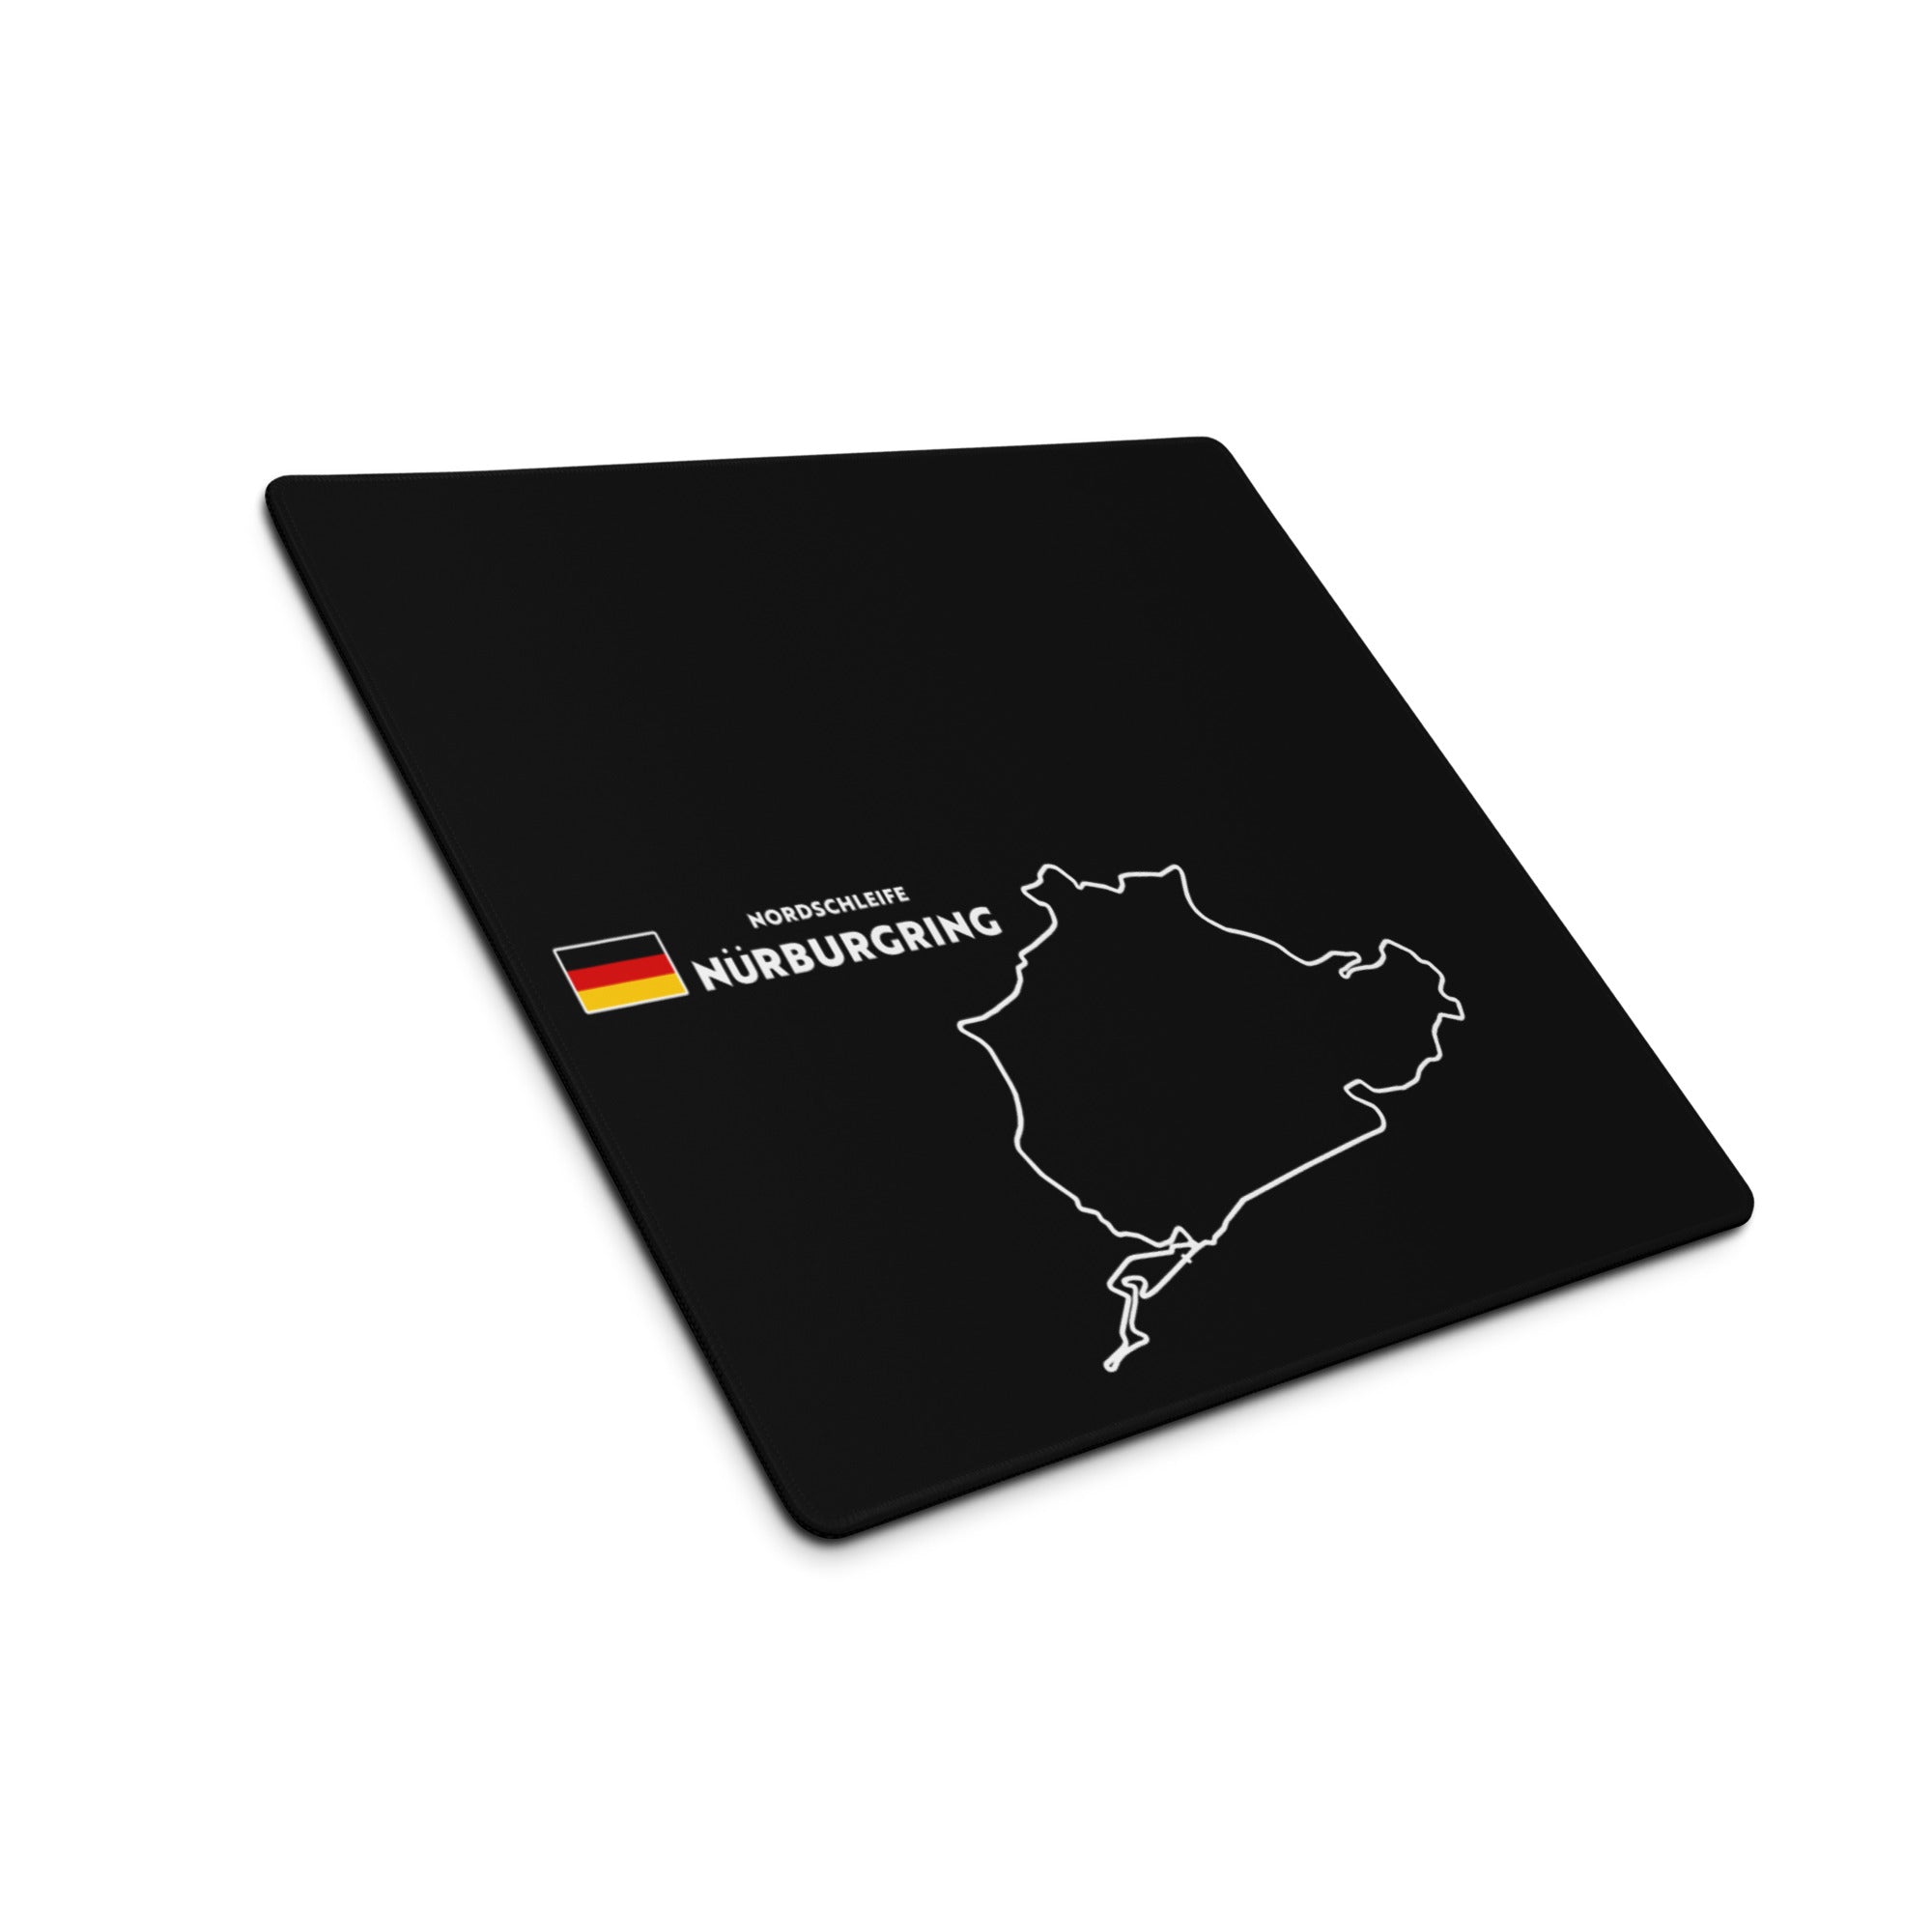 Nurburgring nordschleife f1 24 hours race track circuit mouse pad black large